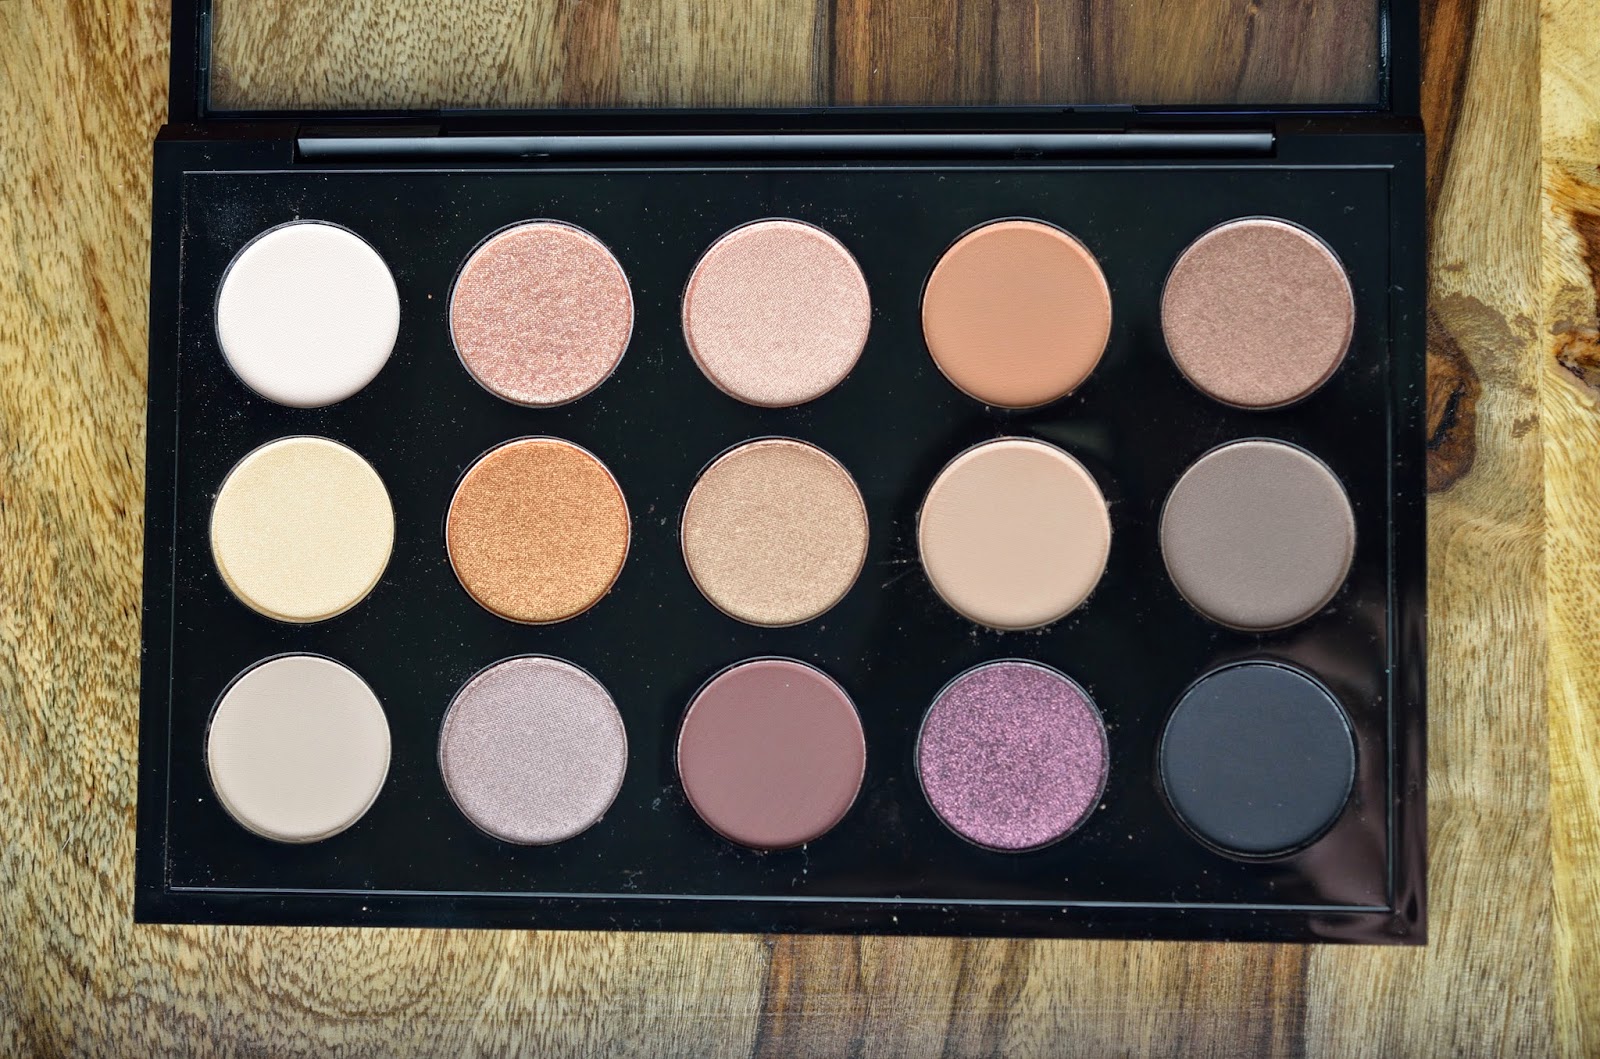 beyond the pale and freckled: MAC Nordstrom Naturals Eyeshadow Palette ...